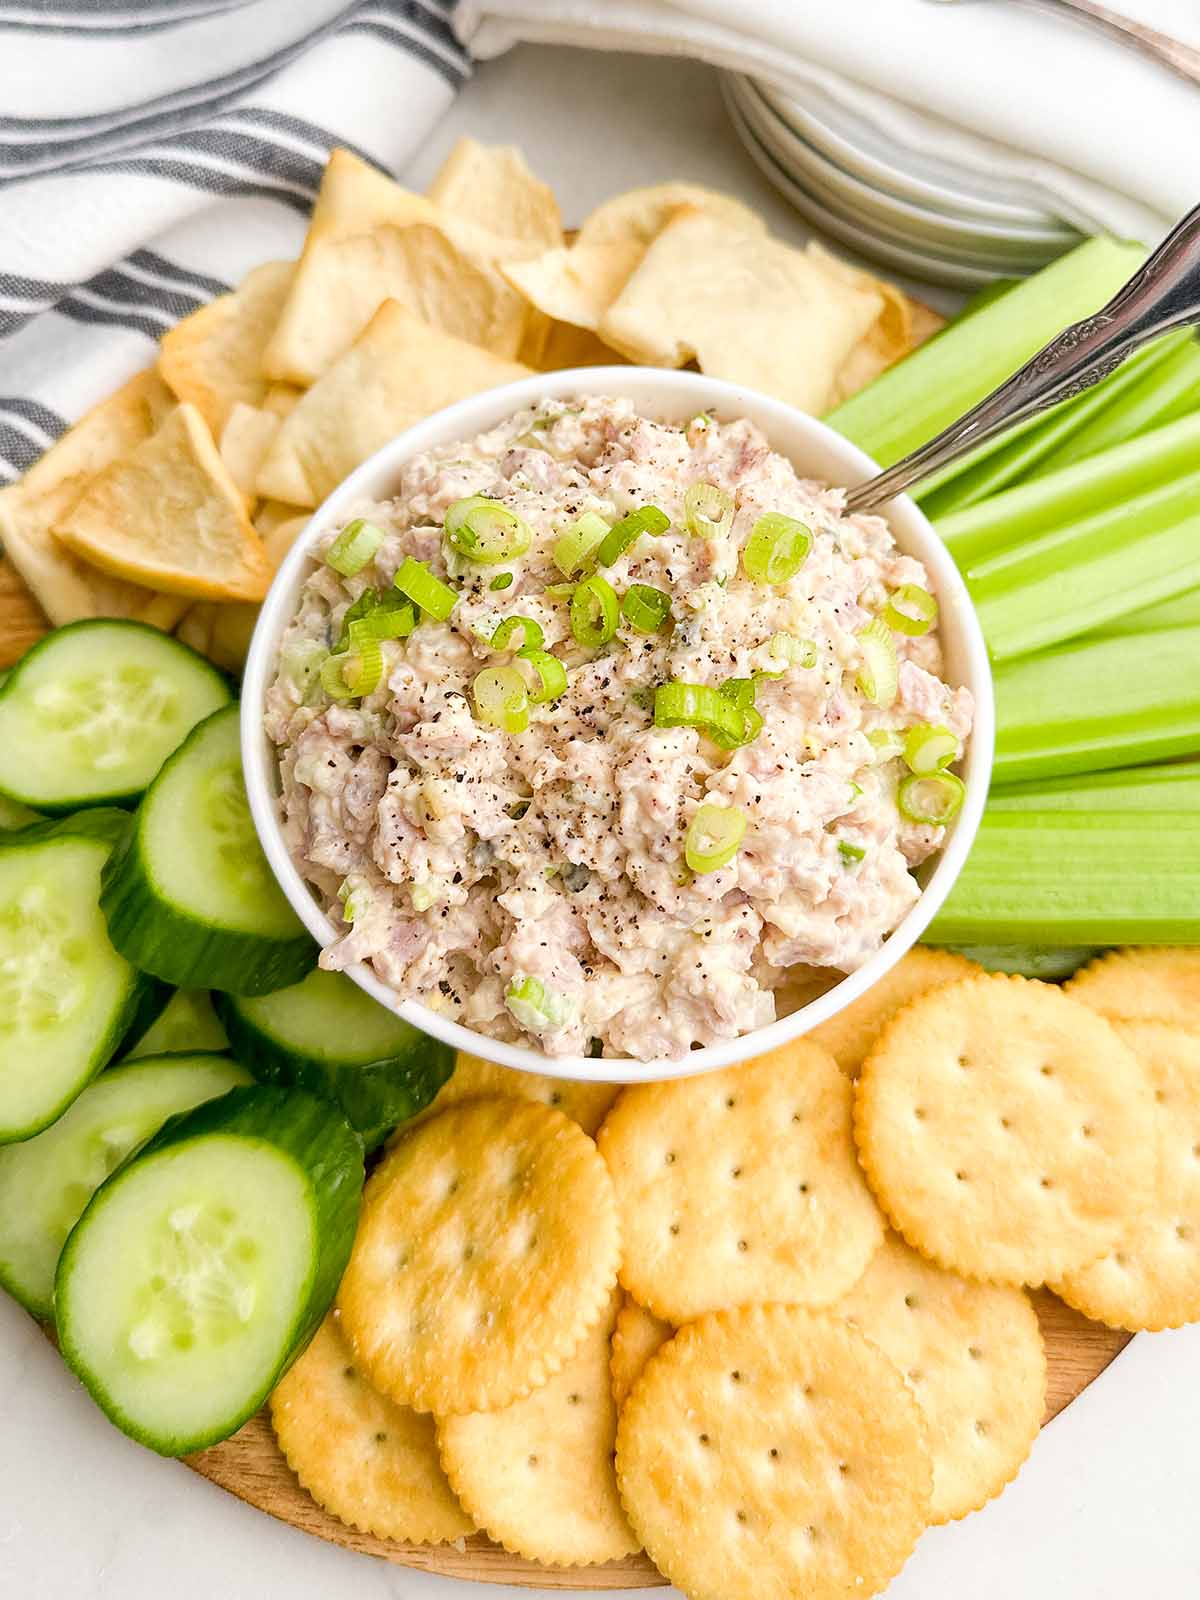 old fashioned ham salad in a white bowl surrounded by cucumbers, celery, and crackers